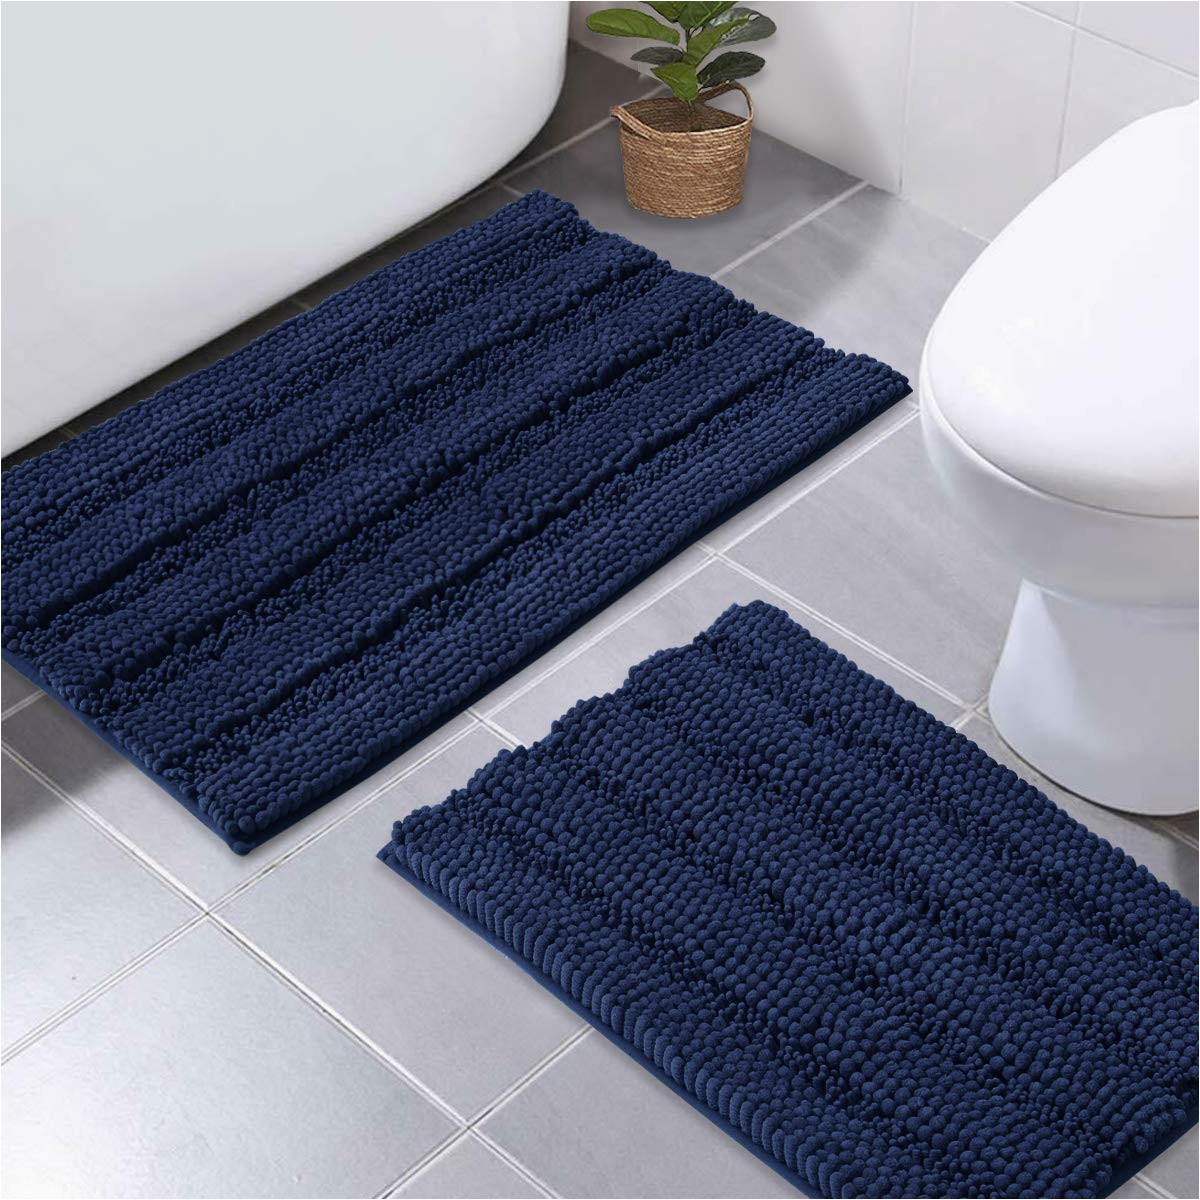 Target Contour Bath Rug Nicetown Navy Blue Bathroom Rugs, Ultra Thick and soft Texture Chenille Plush Floor Mats Hand-tufted Bath Rug with Non-slip Backing, Microfiber Door …